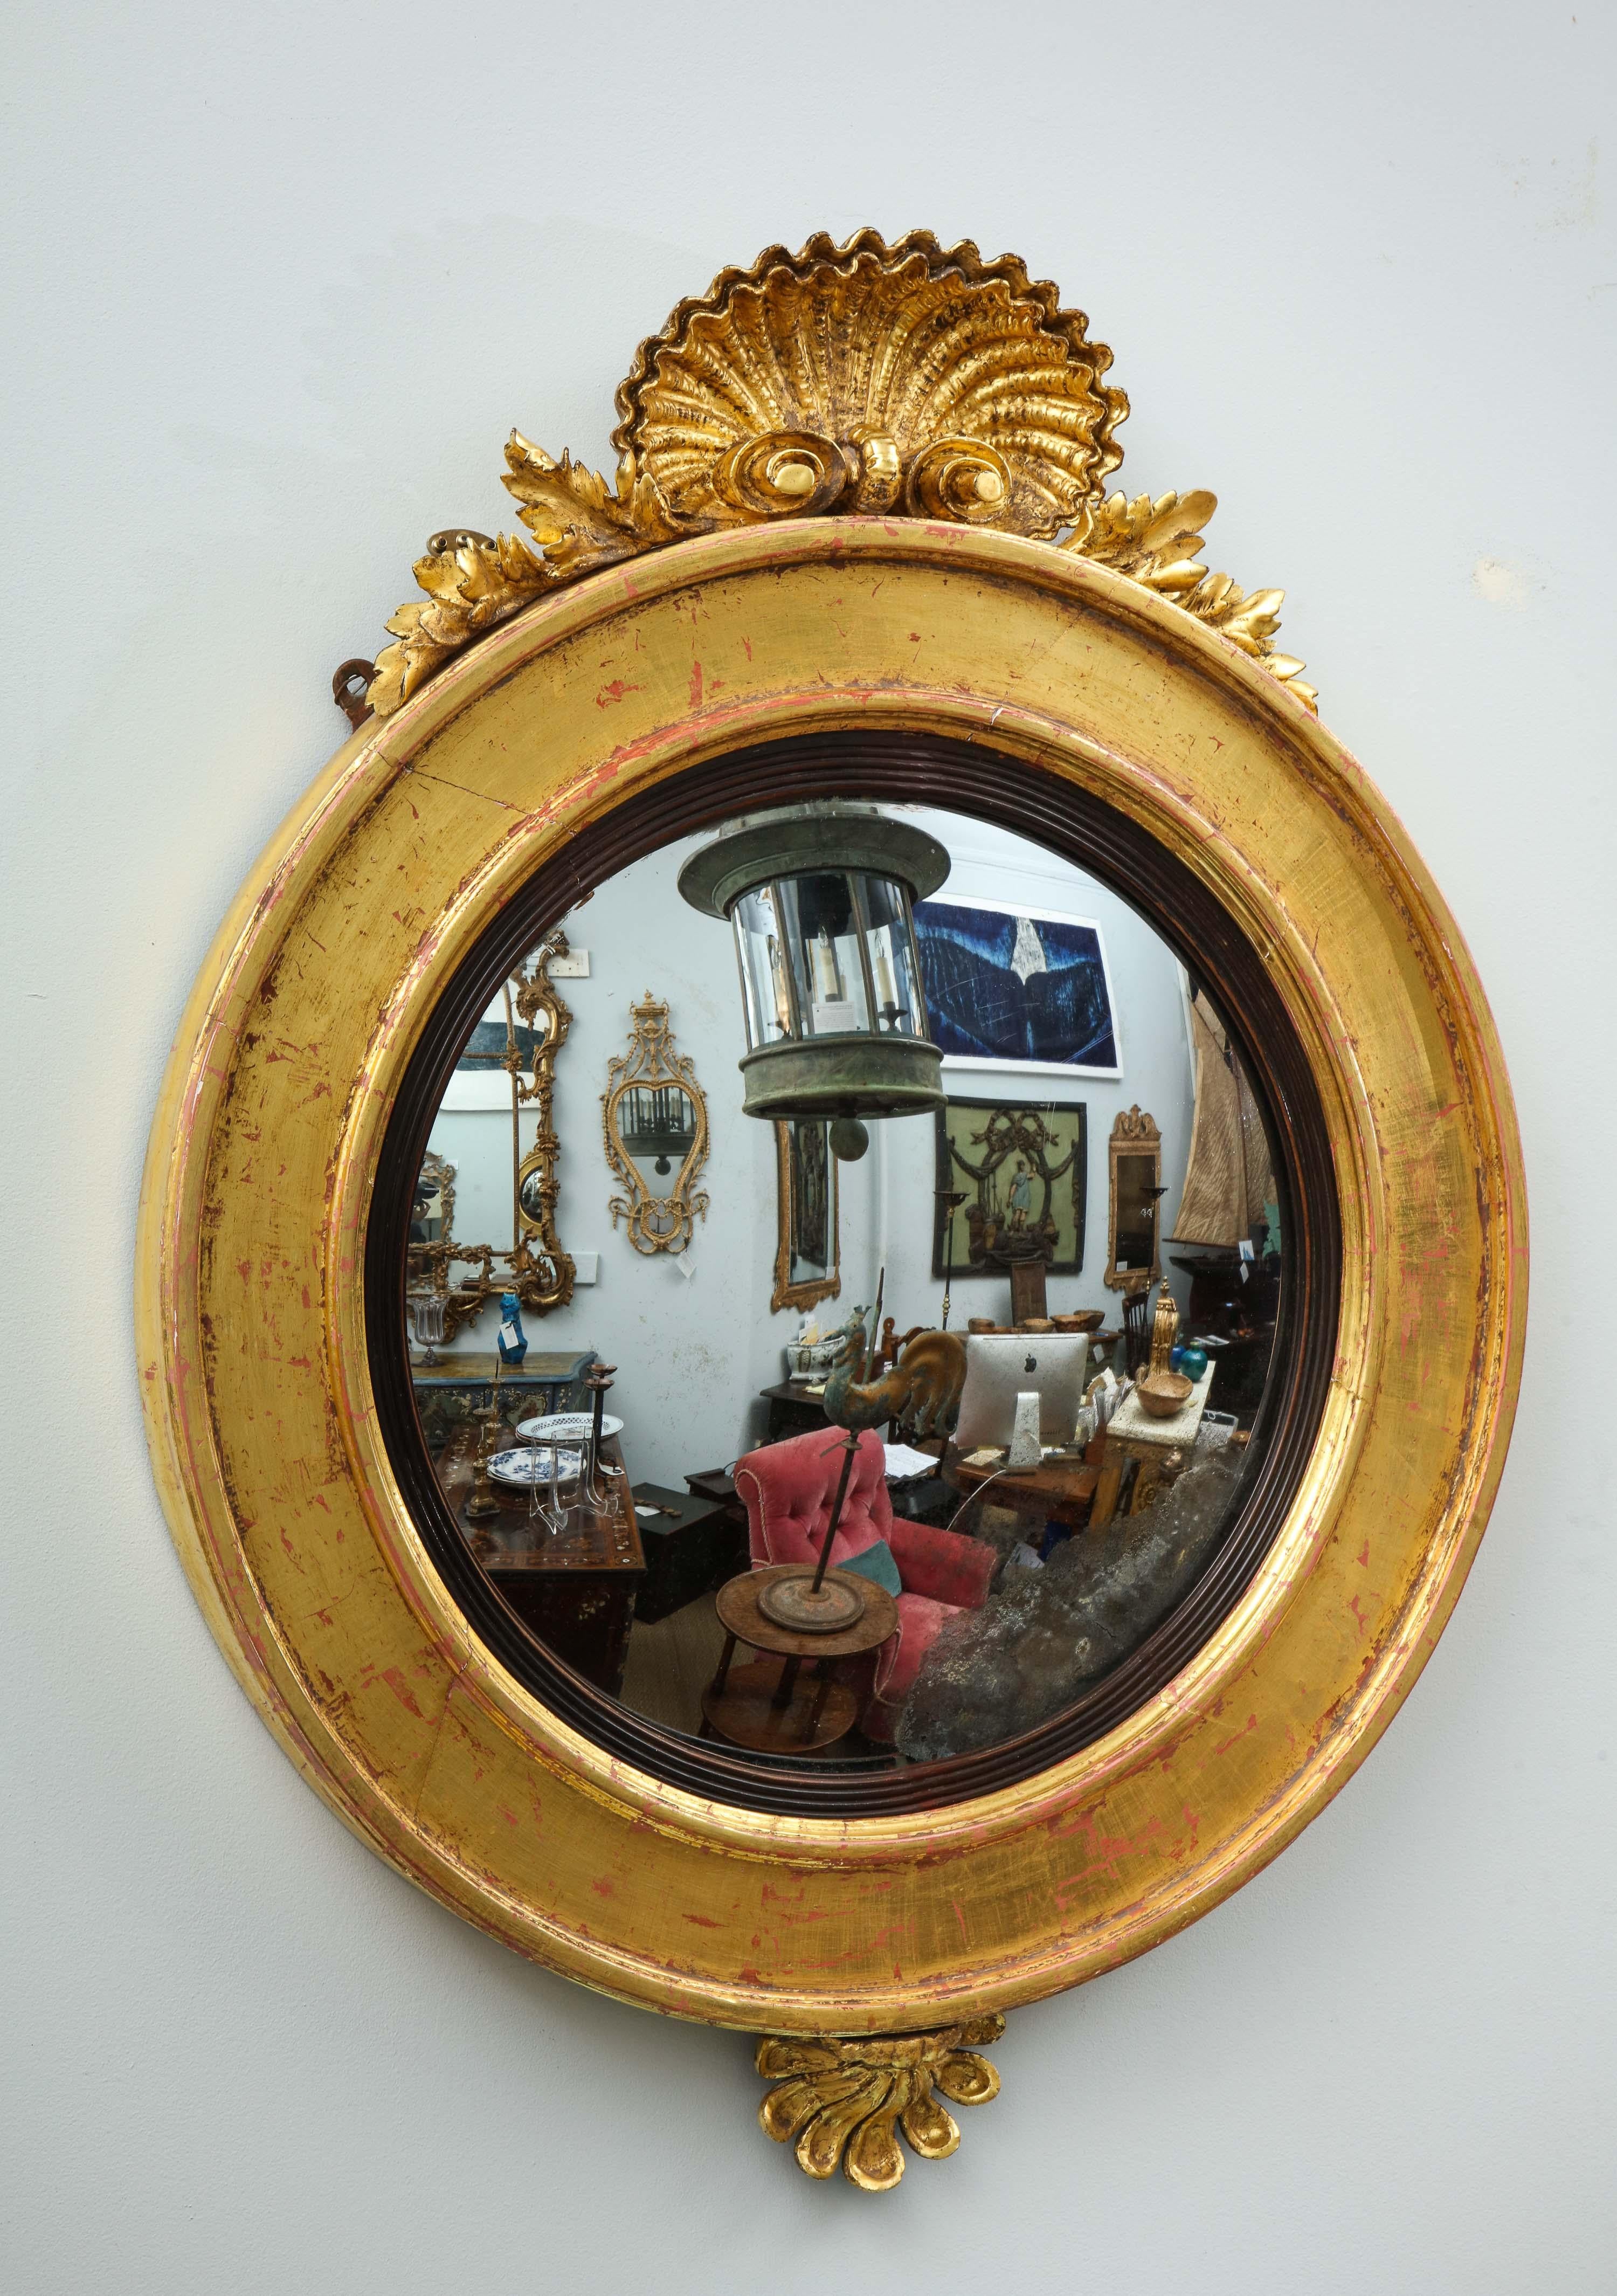 Unusual English early 19th century giltwood convex mirror with finely carved shell crest over simple molded circular frame and ribbed ebonized liner, the base with foliate fan carving, retaining original mercury glass.